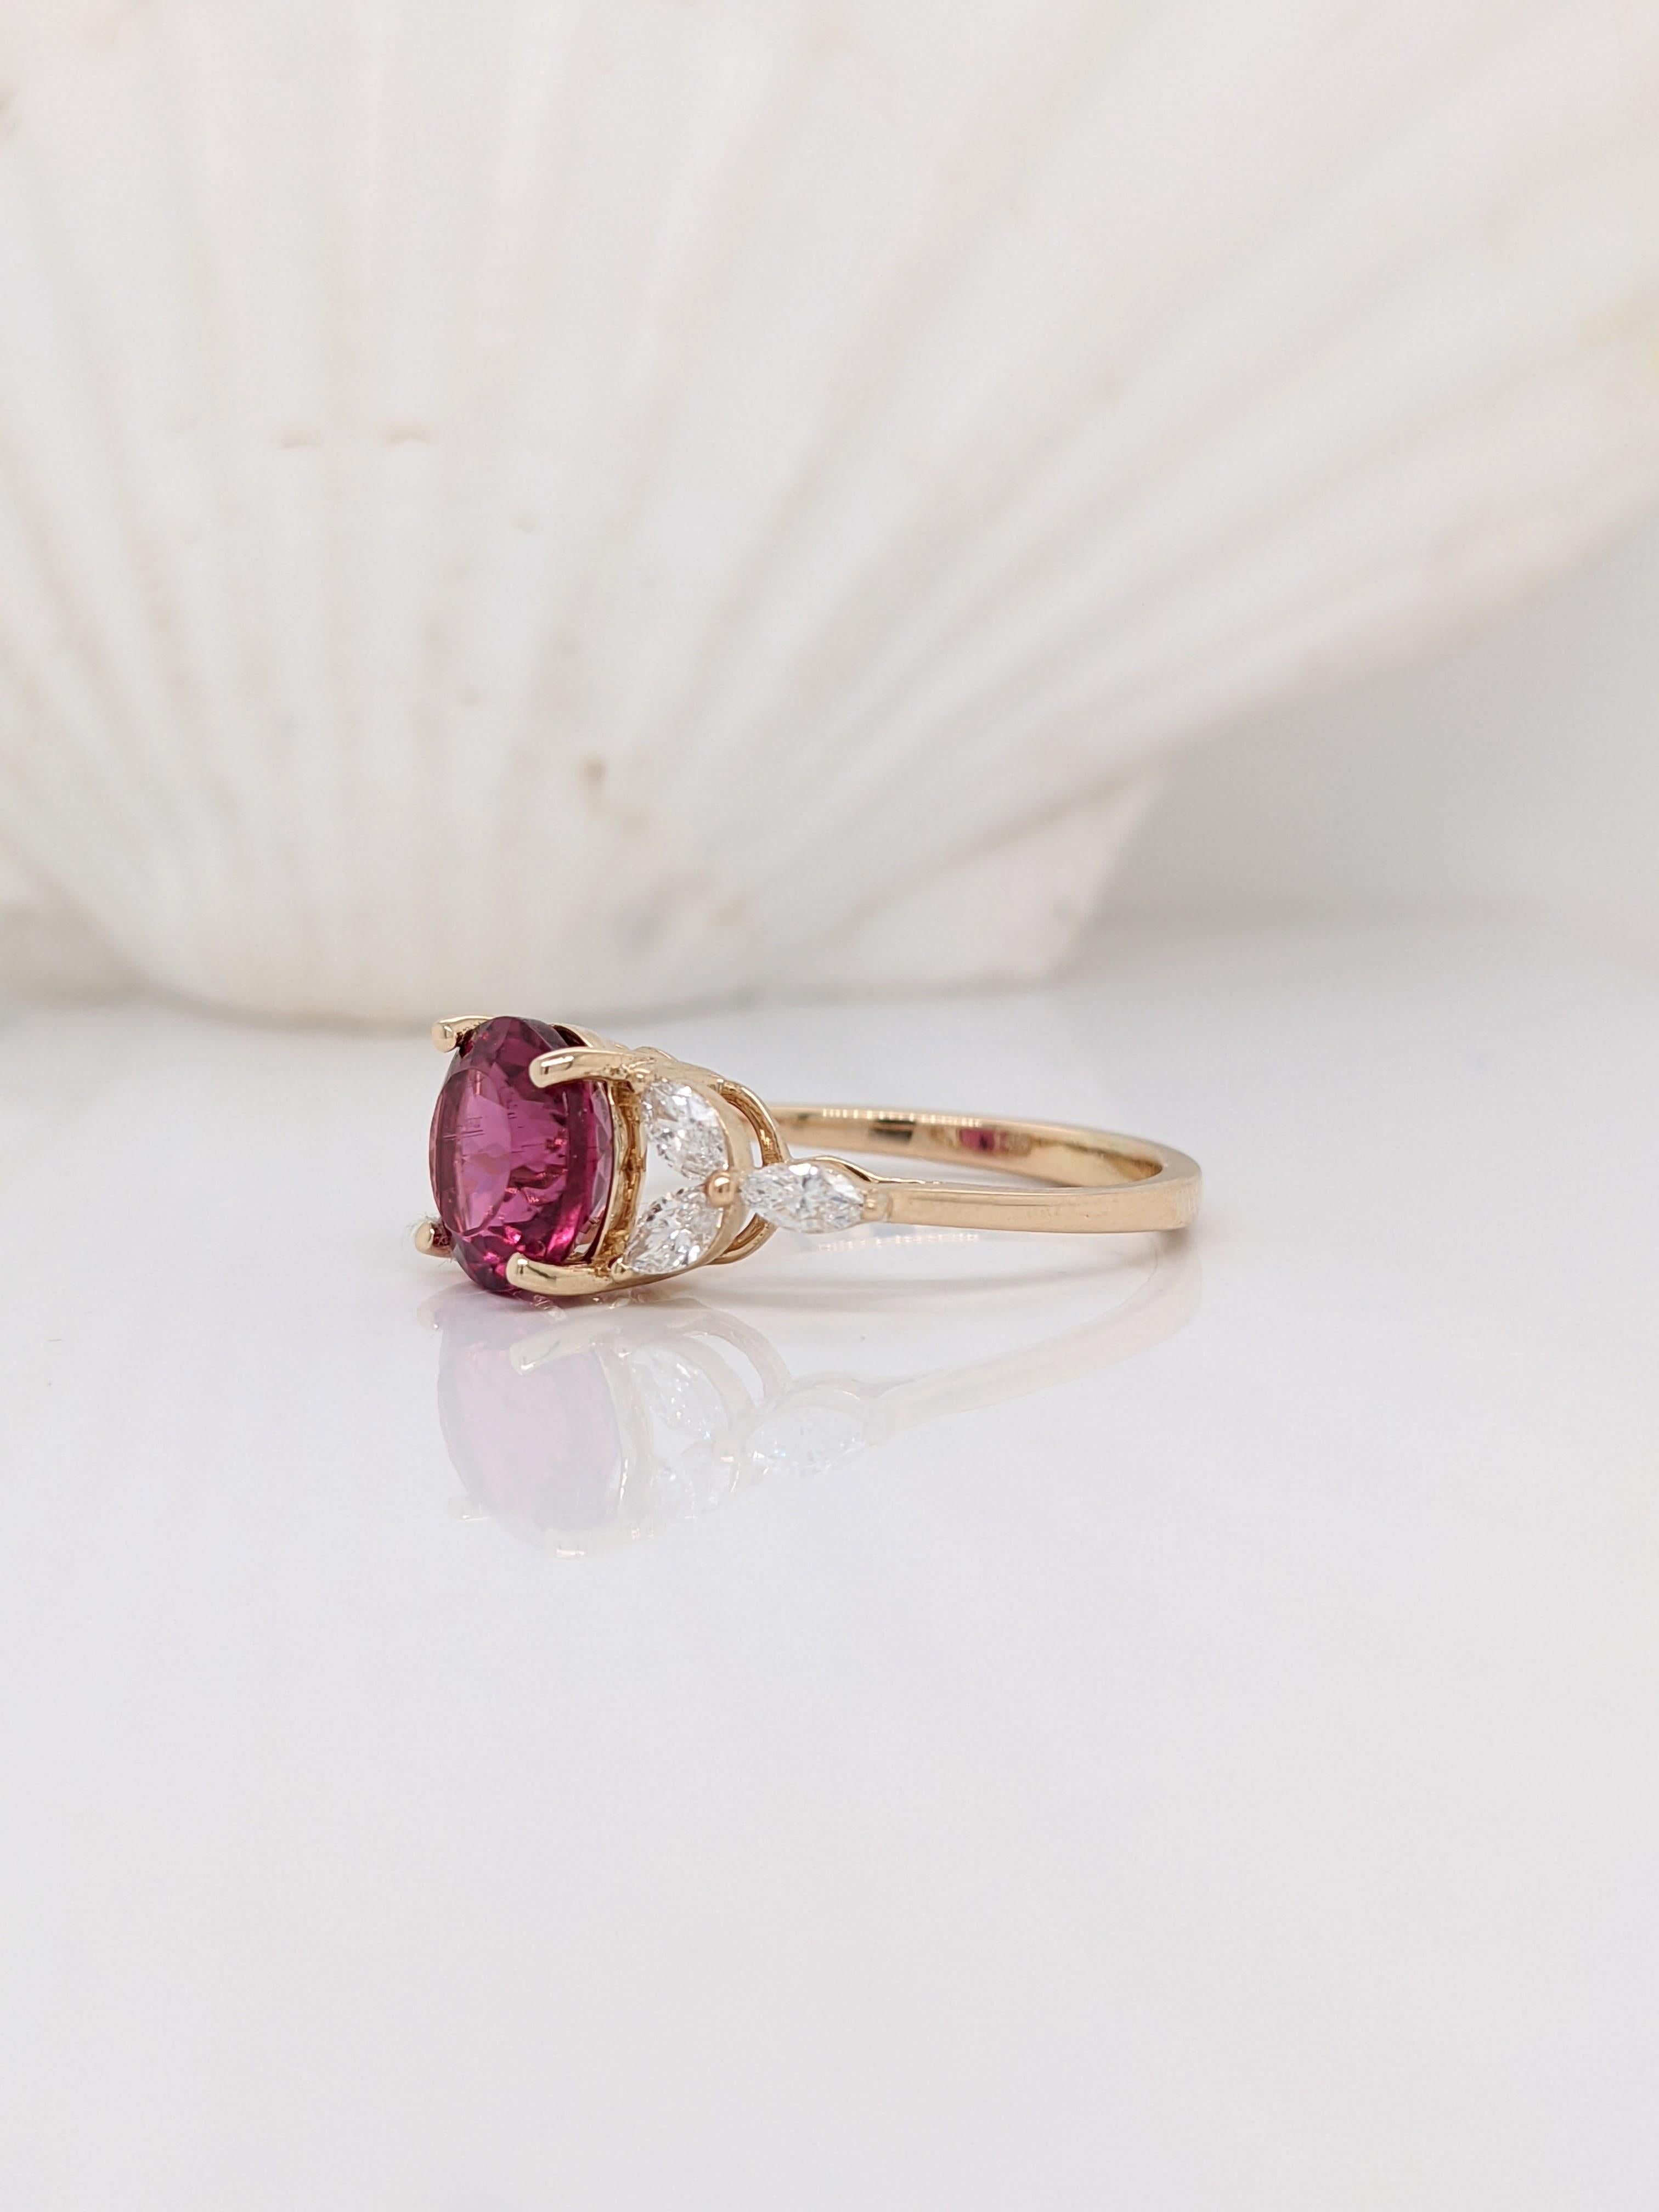 Bright and bold red-magenta Rubellite Tourmaline ring in 14k yellow gold. This stunning center stone is surrounded by marquis diamond accents giving it a floral look. A perfect ring for a unique bride.

Perfect for special occasions such as